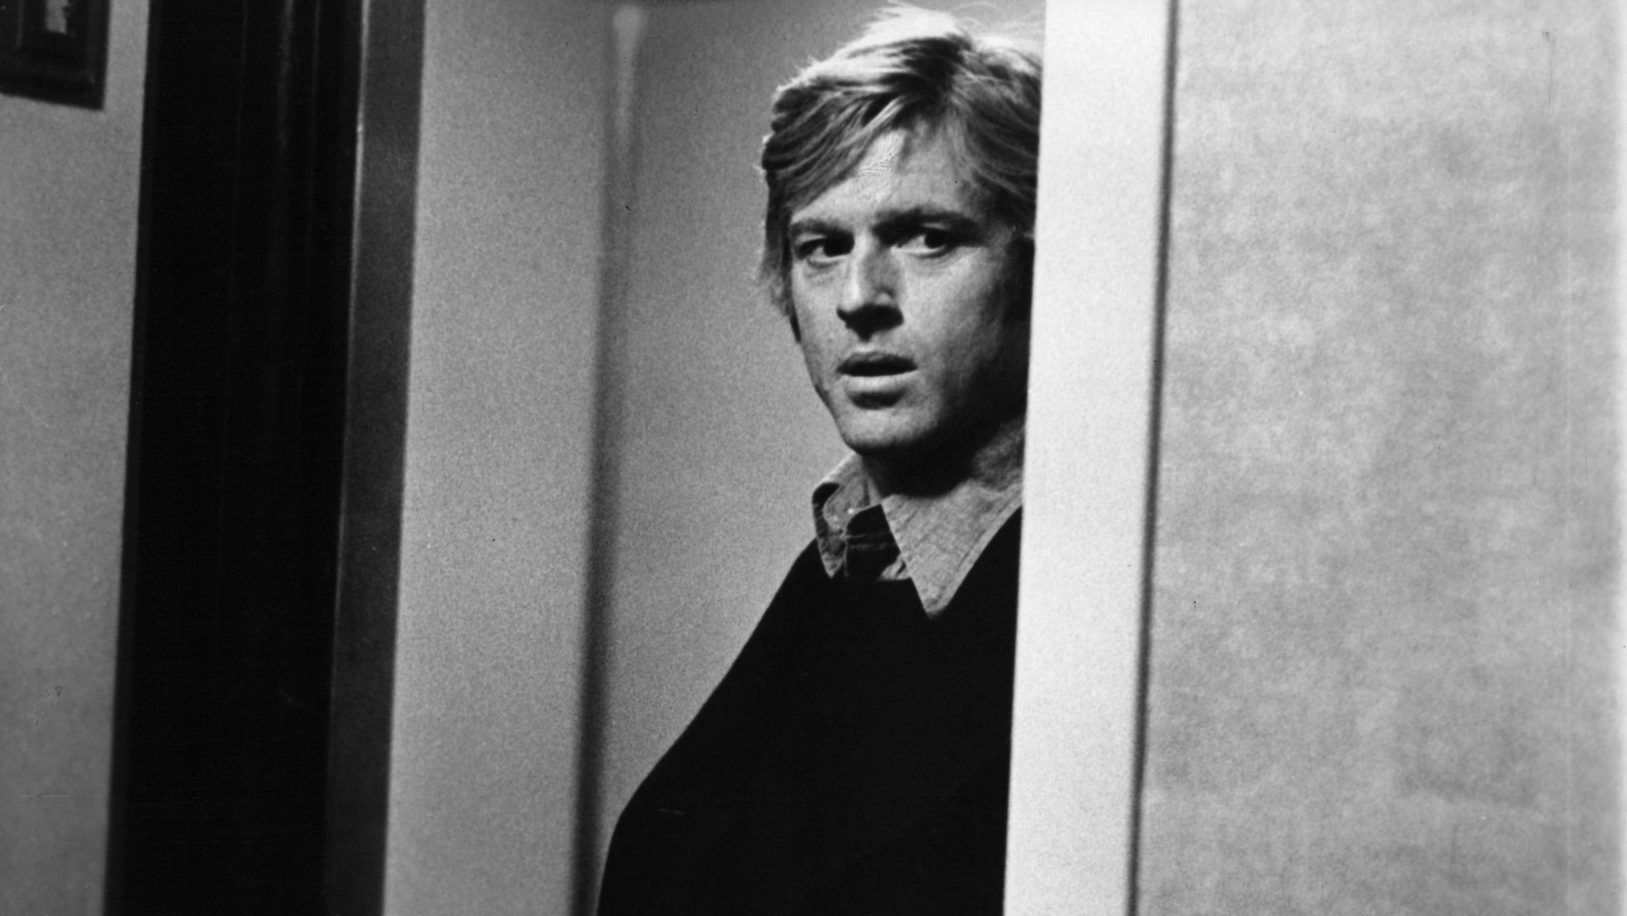 Sydney Pollack’s 1975 political thriller Three Days of the Condor stars Robert Redford as a clandestine CIA agent who discovers that

the ‘deep state’ is out to get him. Photo: Paramount/Getty